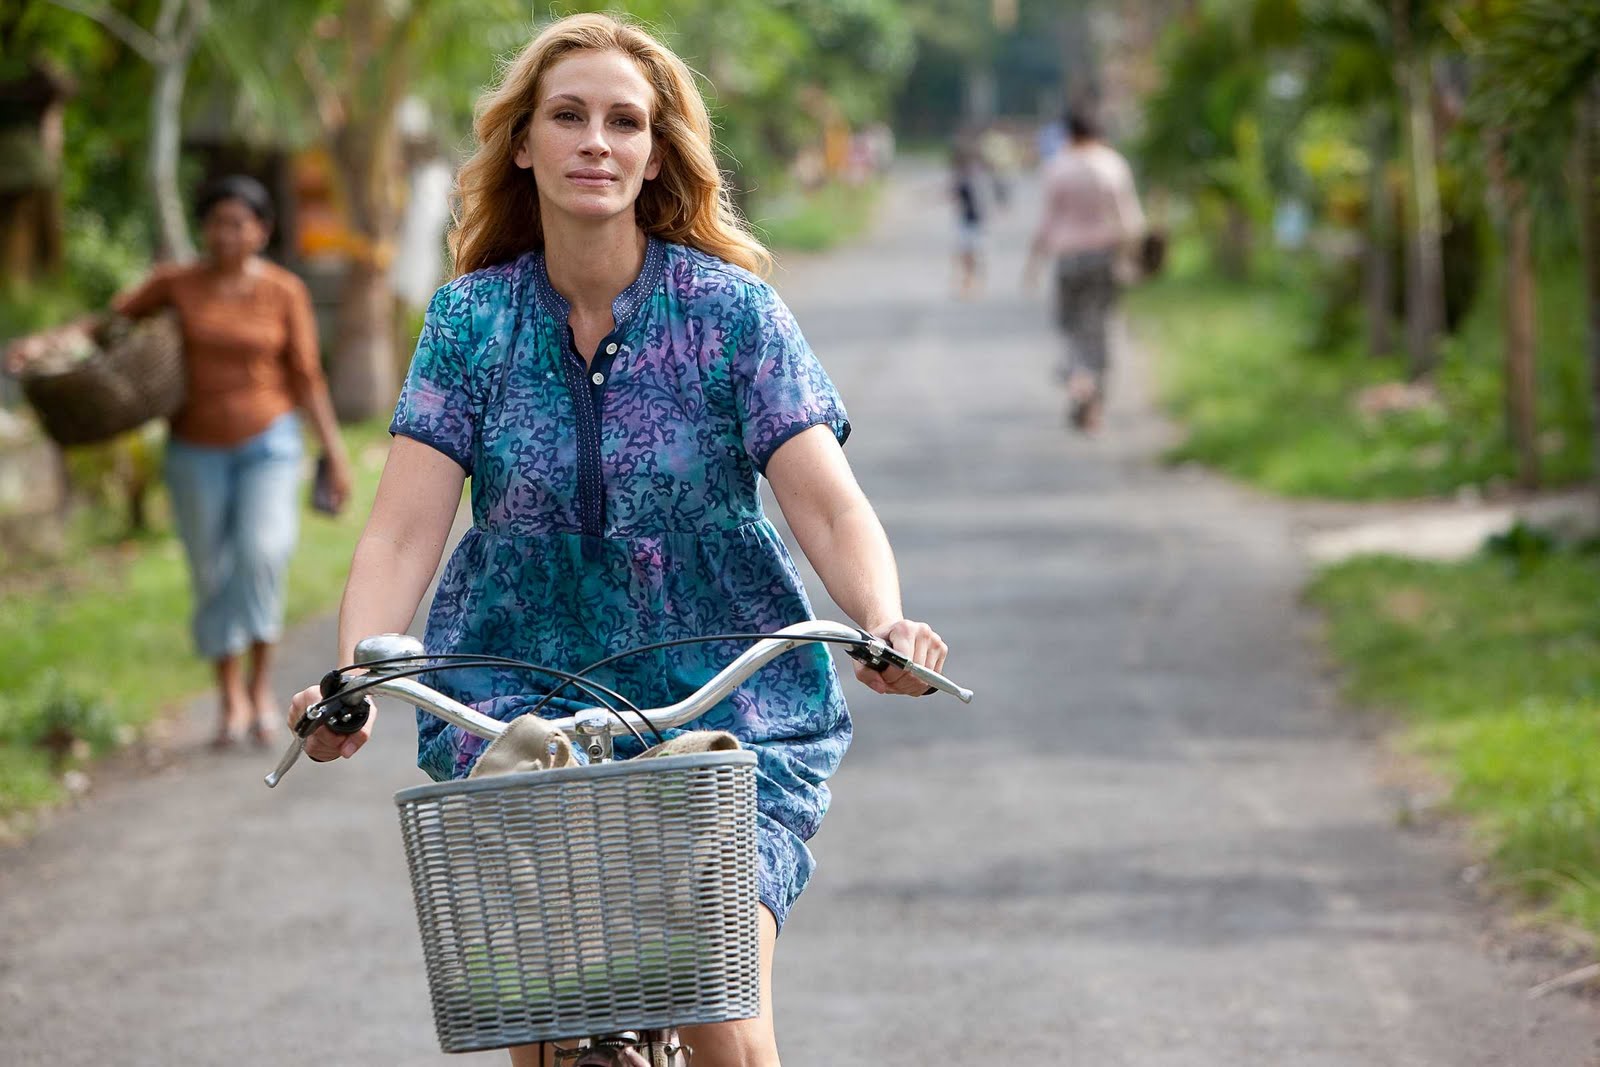 Eat Pray Love Wallpapers Movie Hq Eat Pray Love Pictures 4k Wallpapers 2019